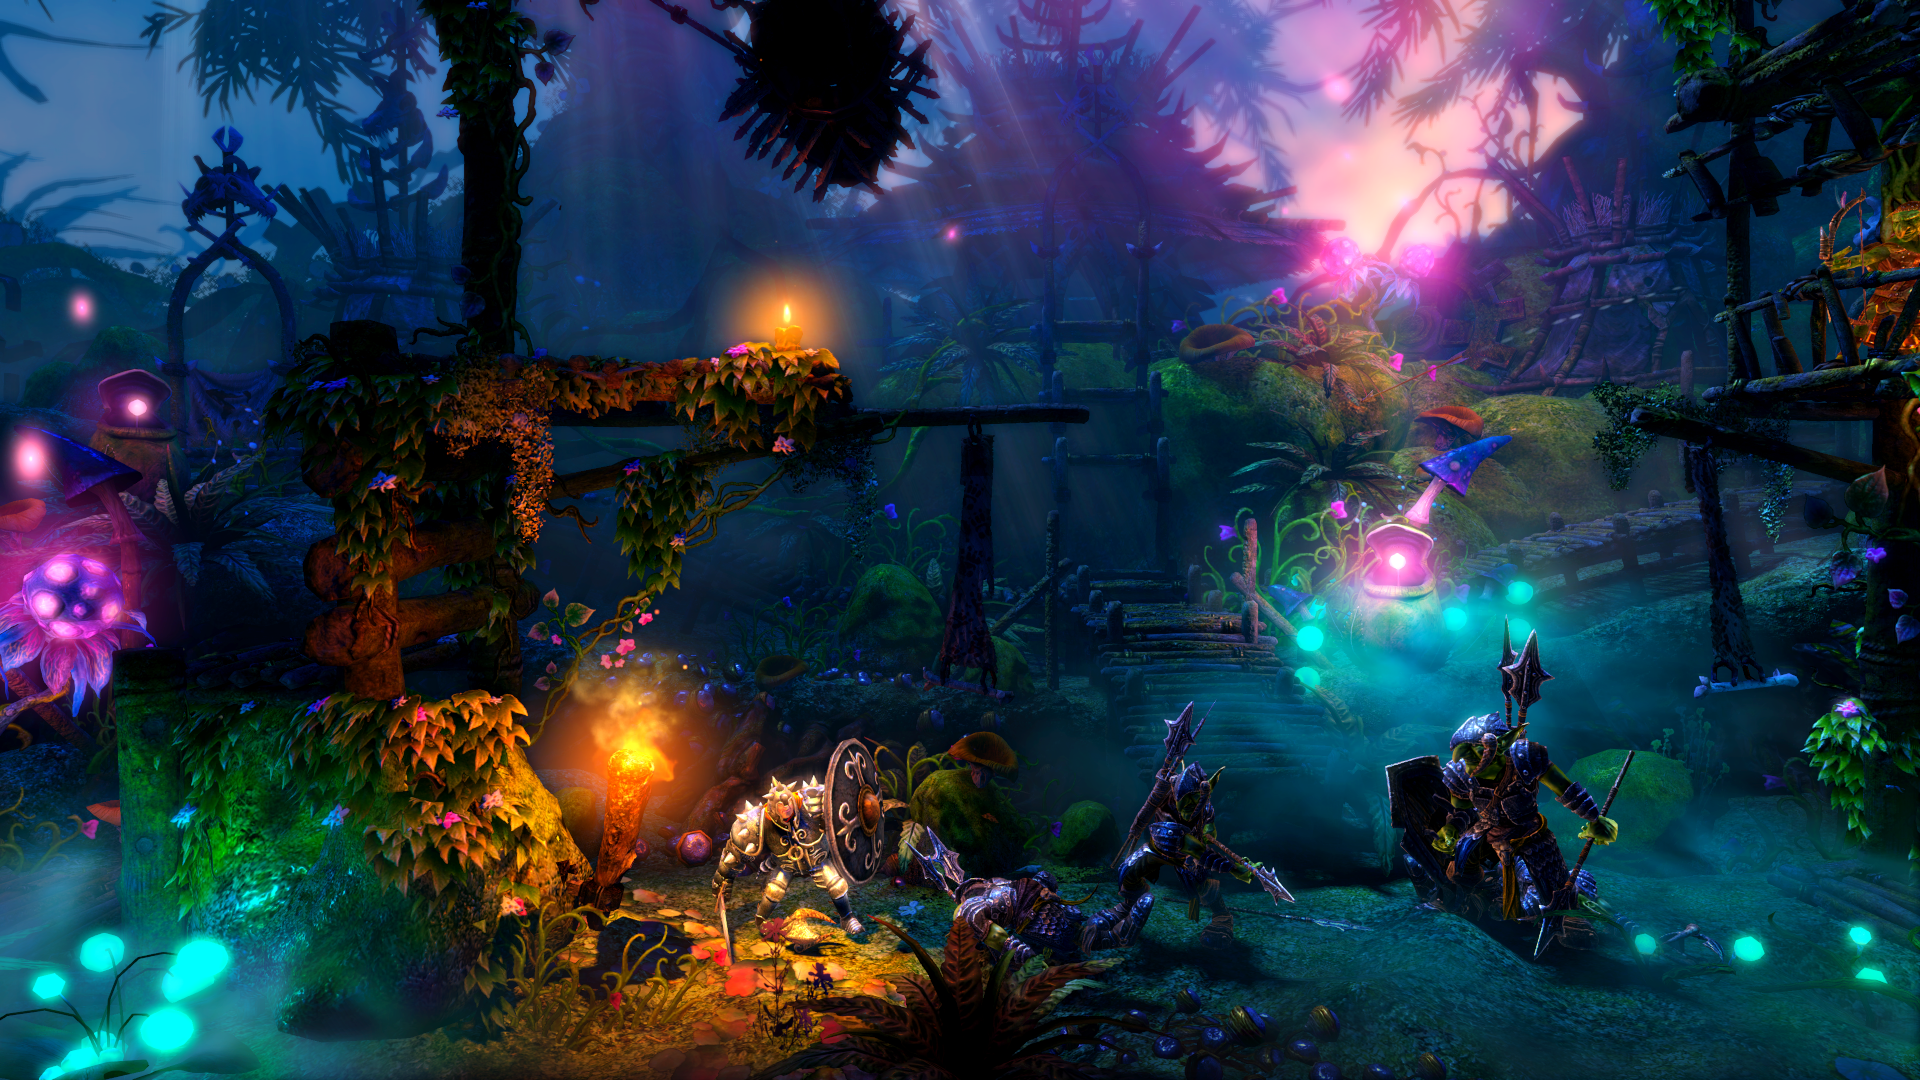 trine 2 complete story pc free full zip